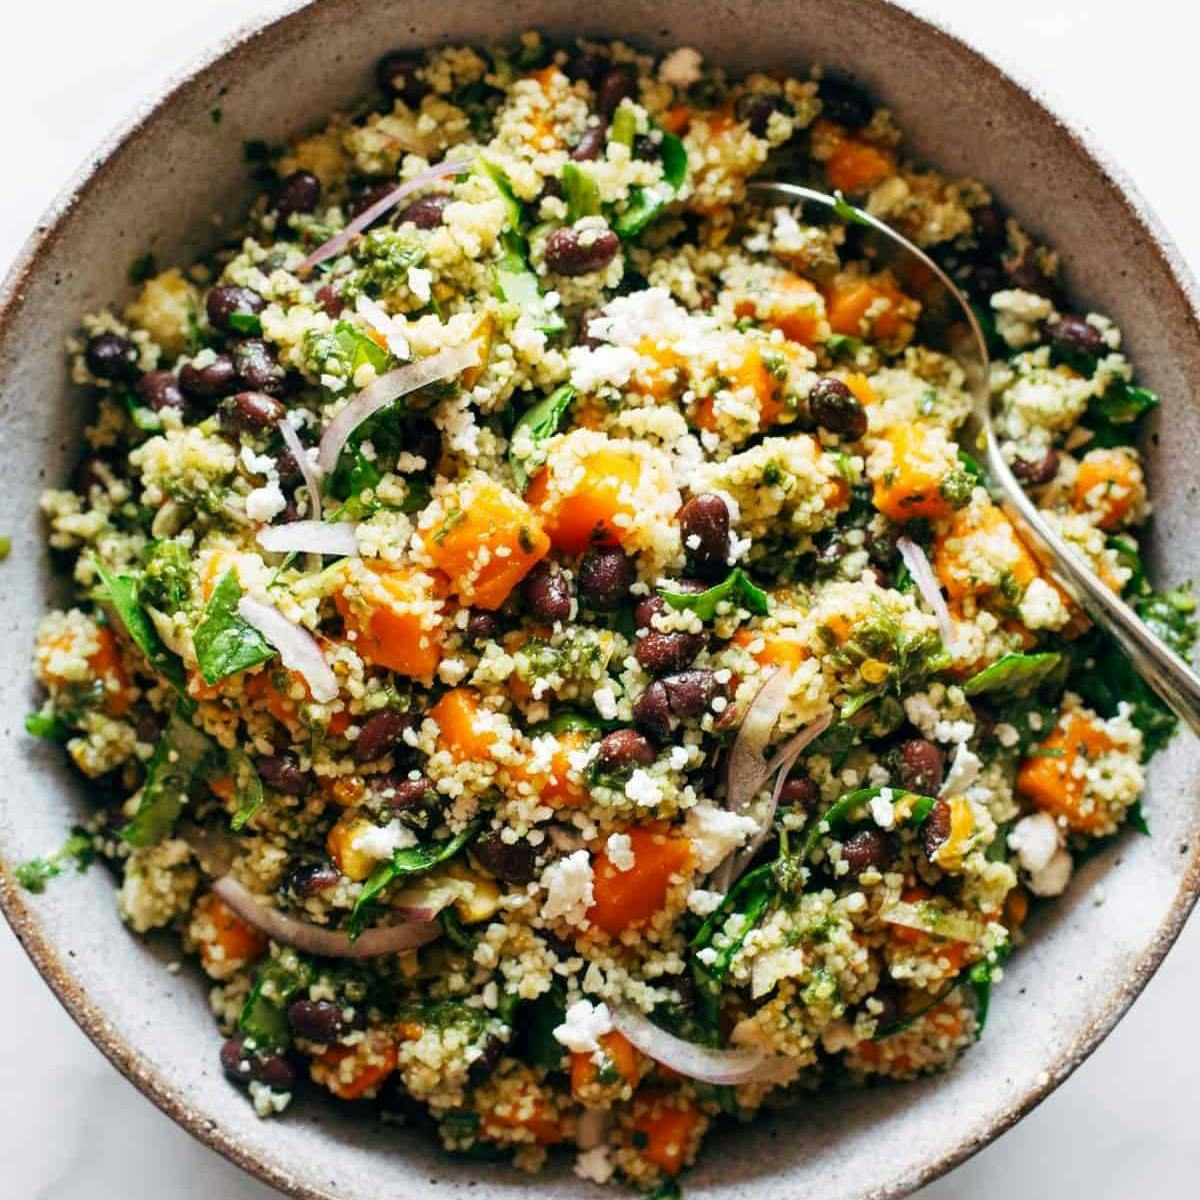 Couscous salad in a bowl with a spoon